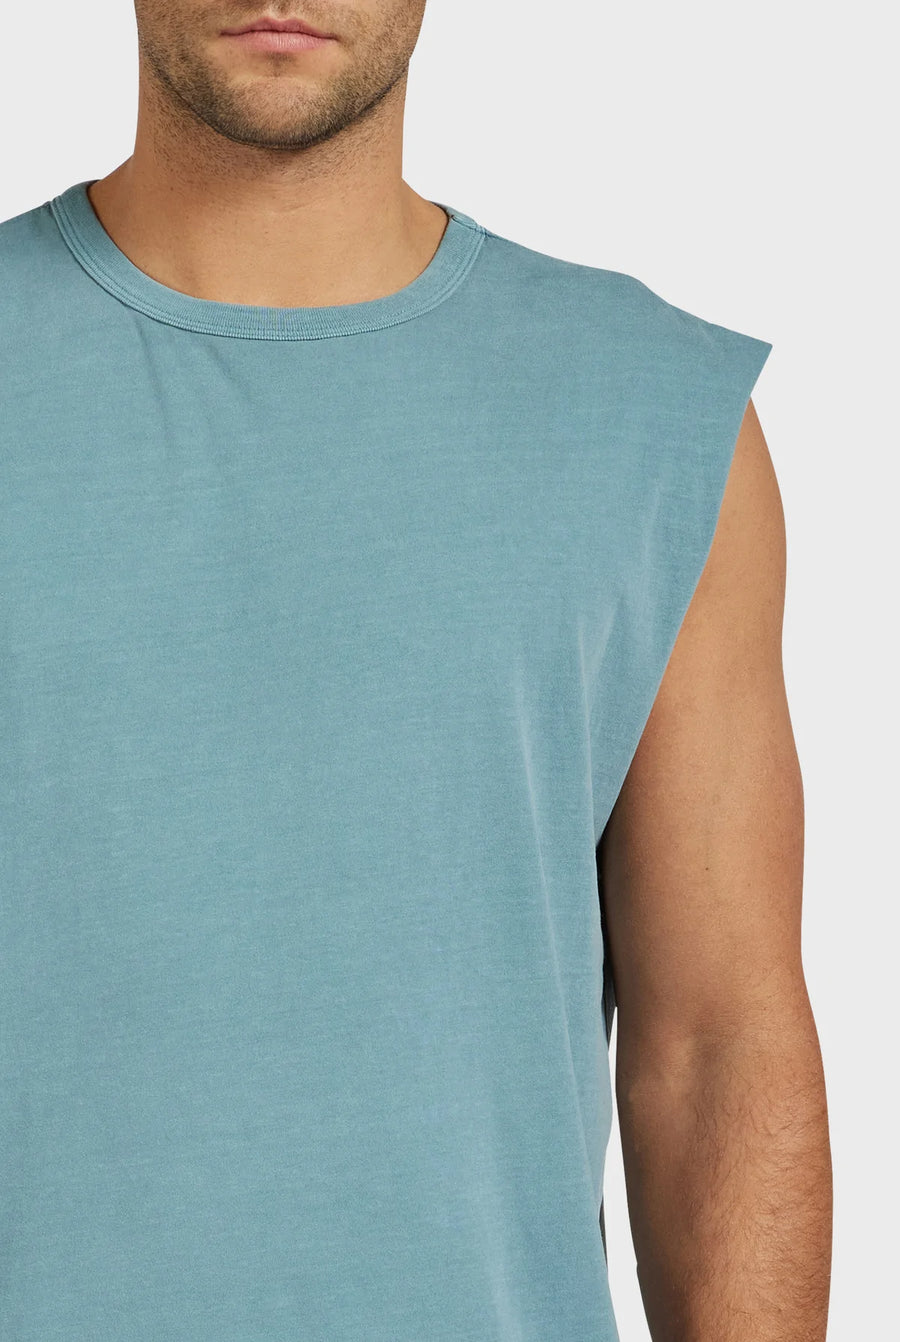 The Academy Brand Jimmy Muscle Tee - Storm Blue